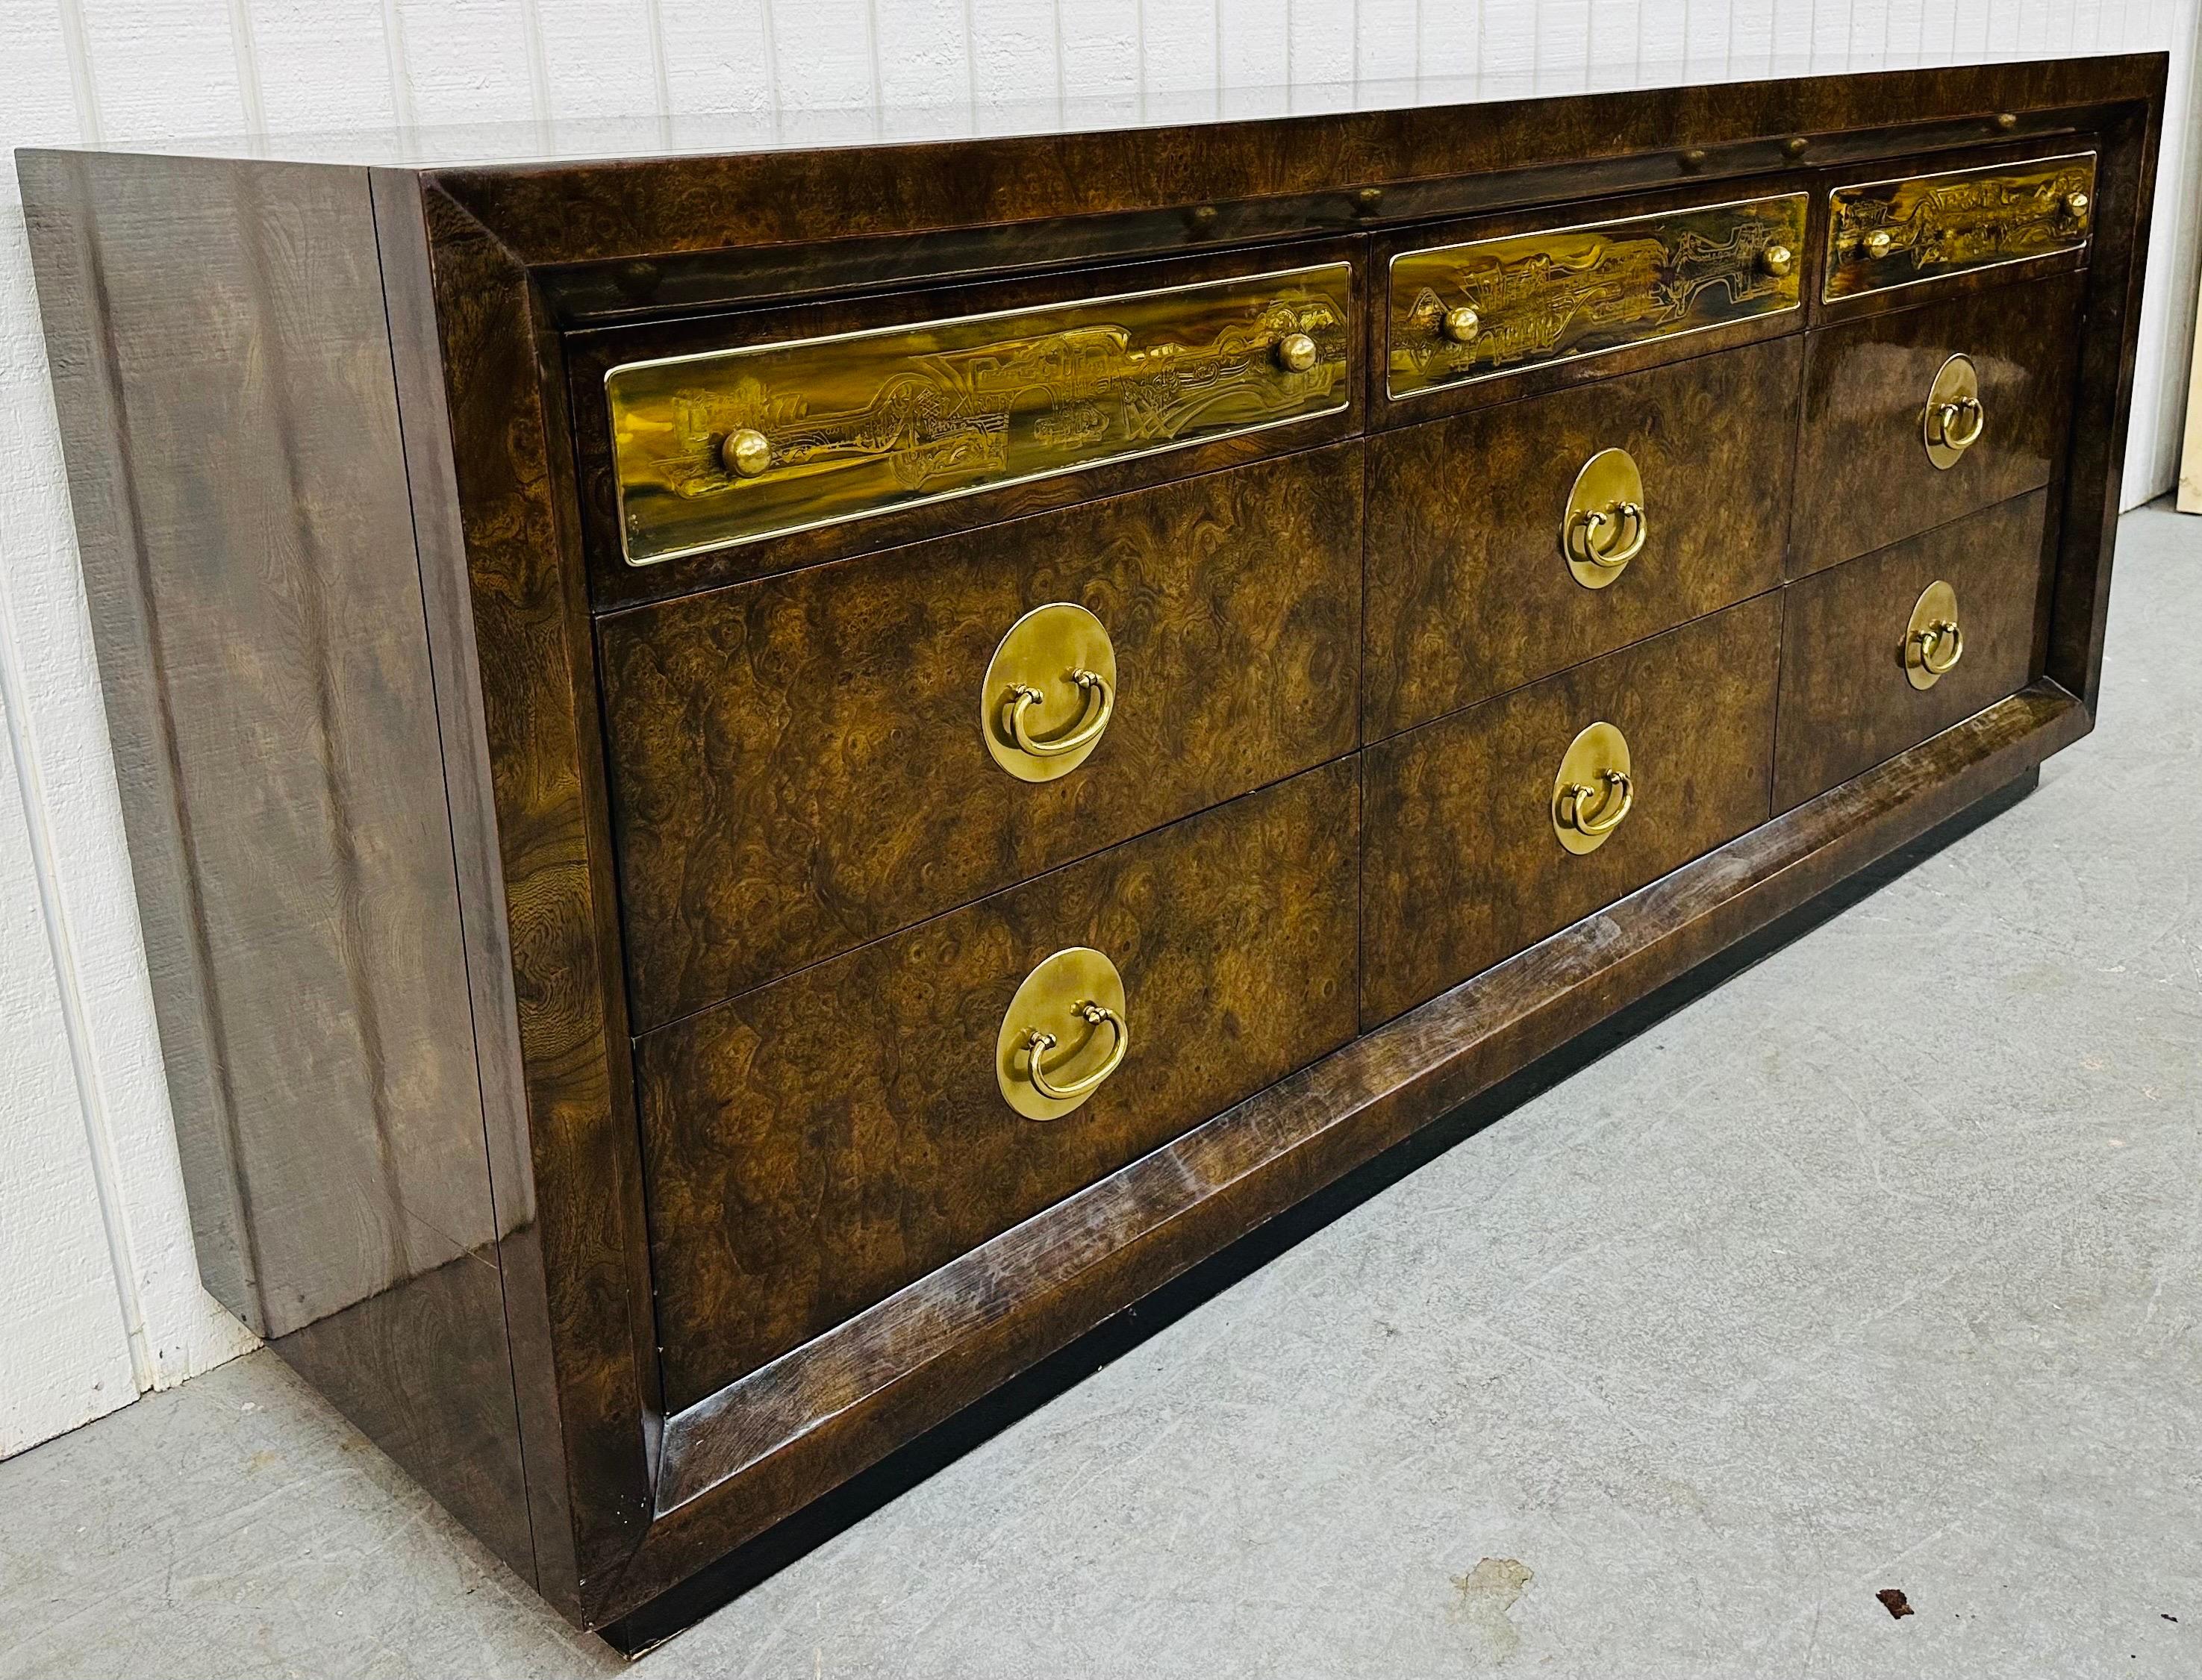 This listing is for a Vintage Bernhard Rohne for Mastercraft Burled Wood Dresser. Featuring a straight line design, plinth base, nine drawers for storage, beautiful decorative brass plates on the top drawers, original brass pulls on the